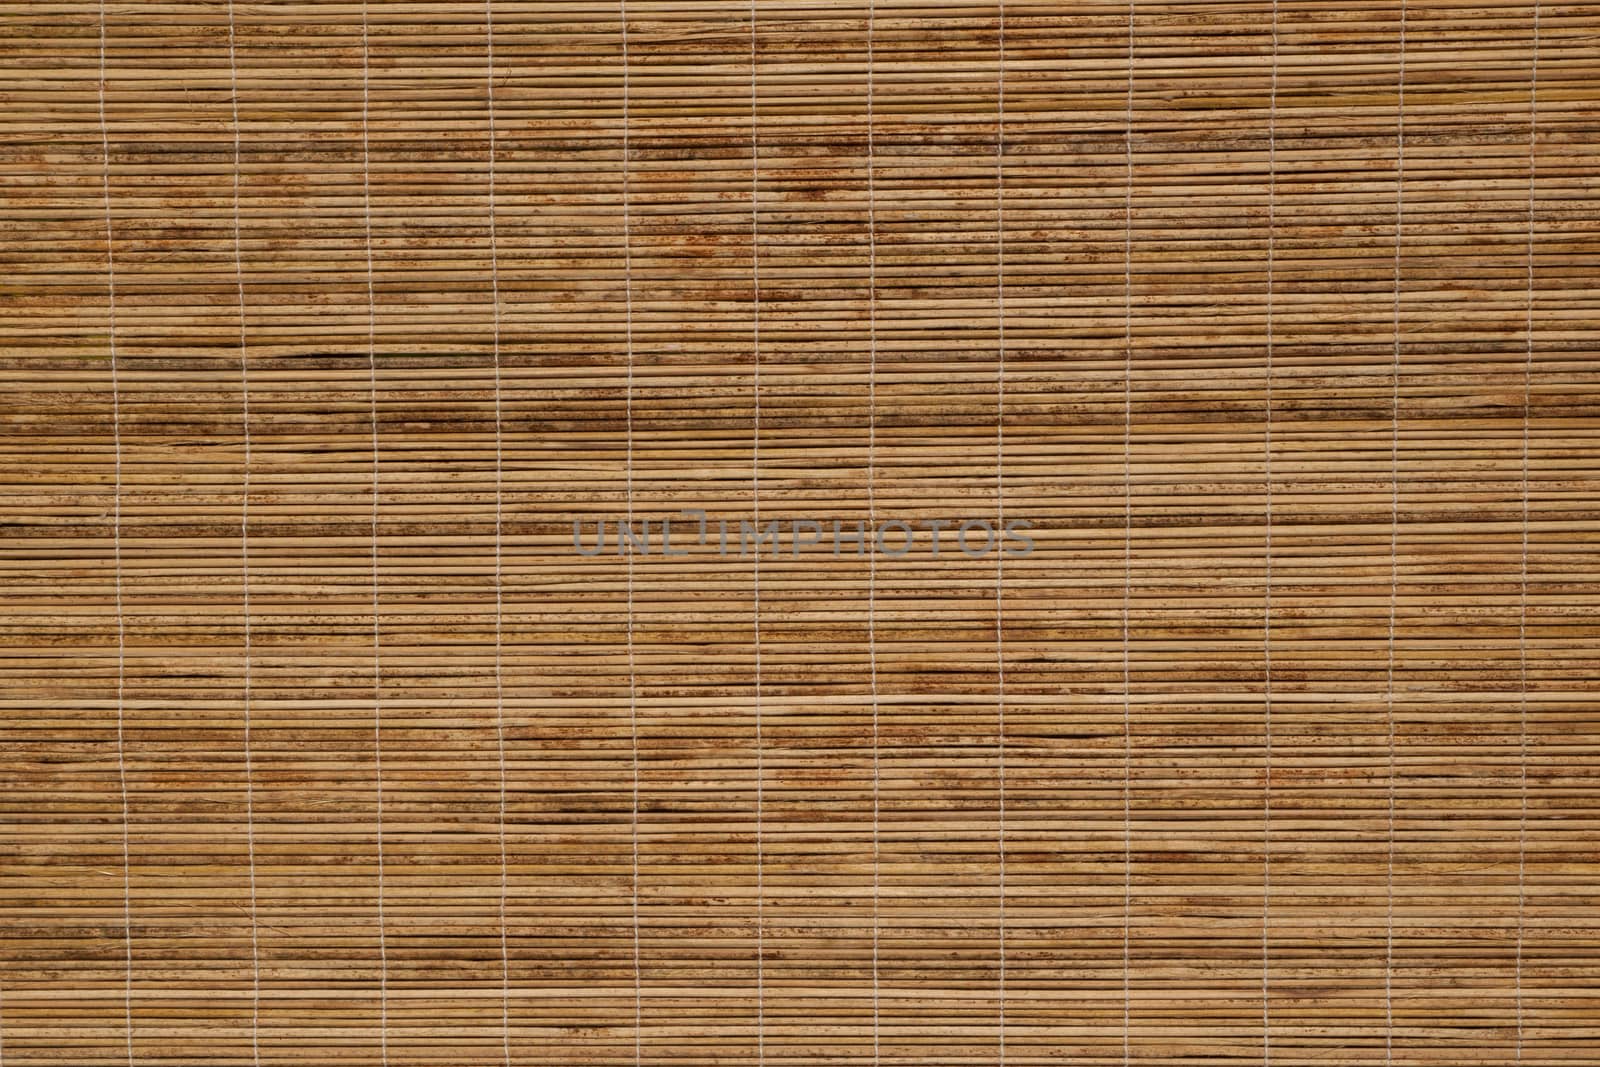 Pattern of bamboo blinds texture for background